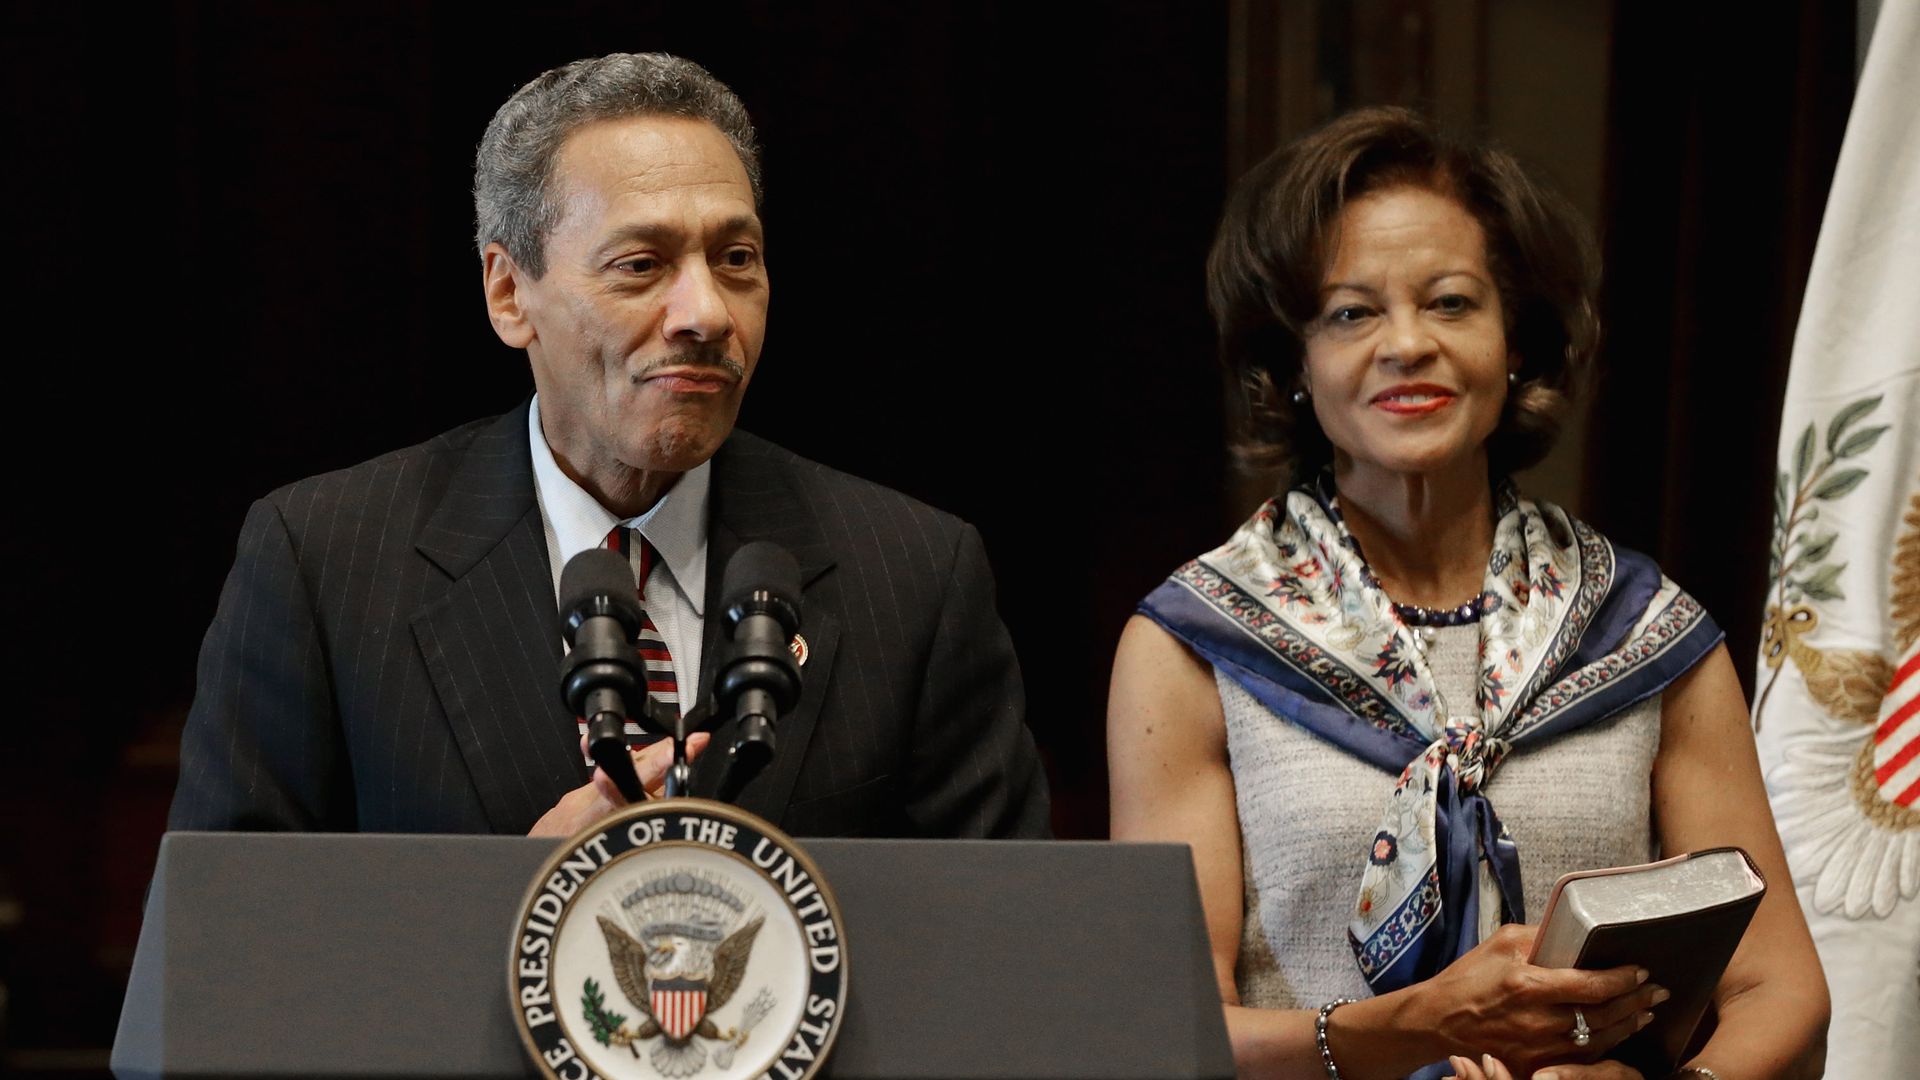 Federal Housing Finance Agency Director Mel Watt  delivers remarks after being sworn. His wife Eulada Watt  stands by his side.